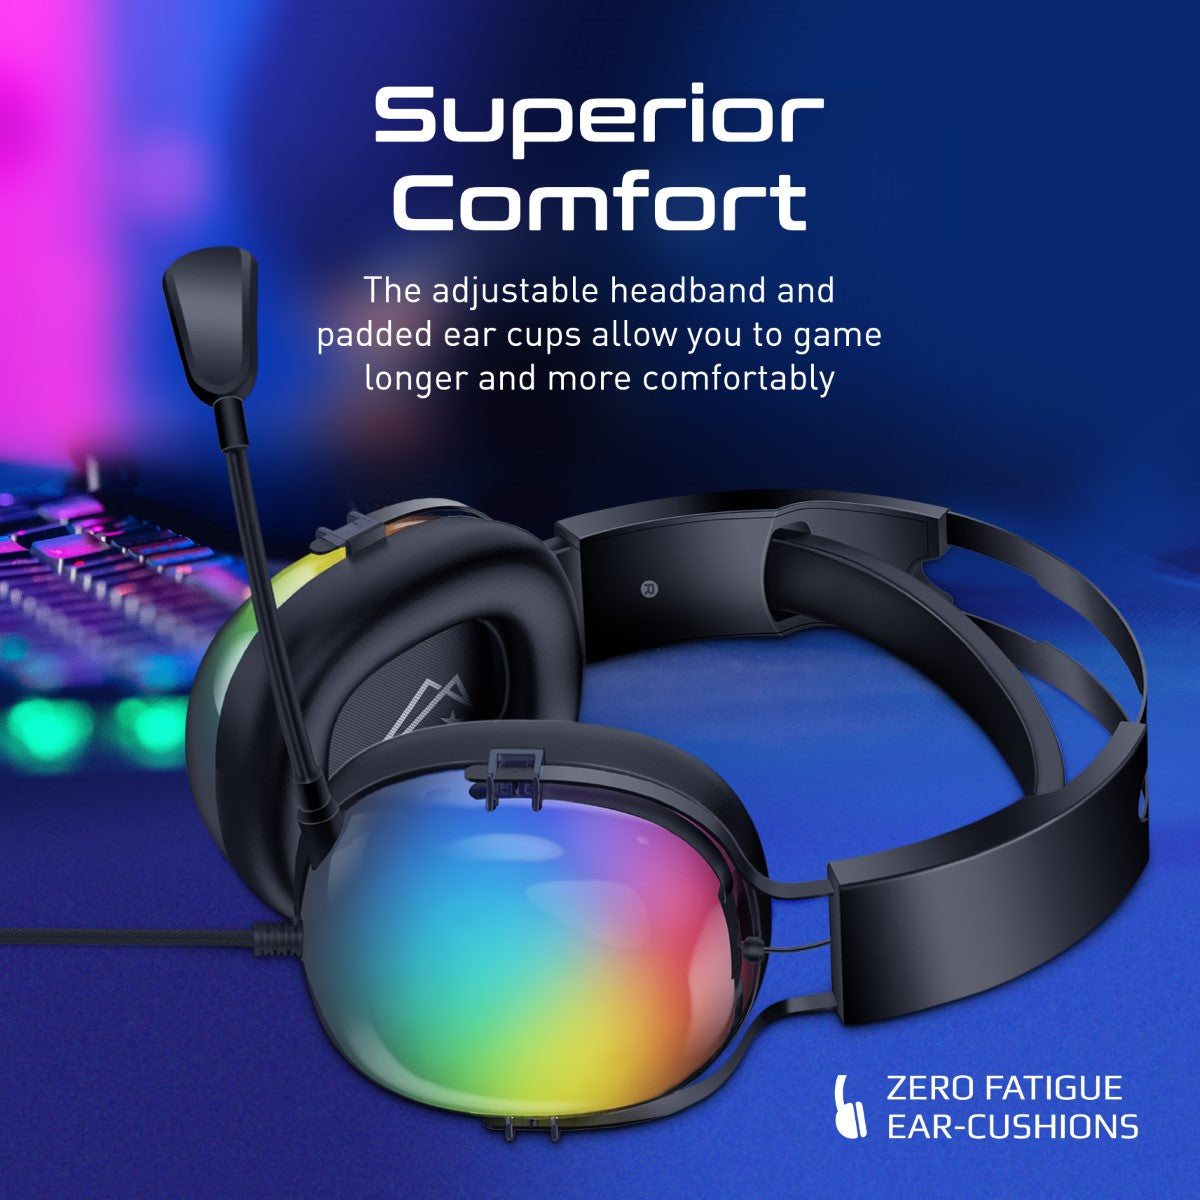 High Performance 7.1 Stereo Sound Gaming Lumiflux™ Headset with Microphone